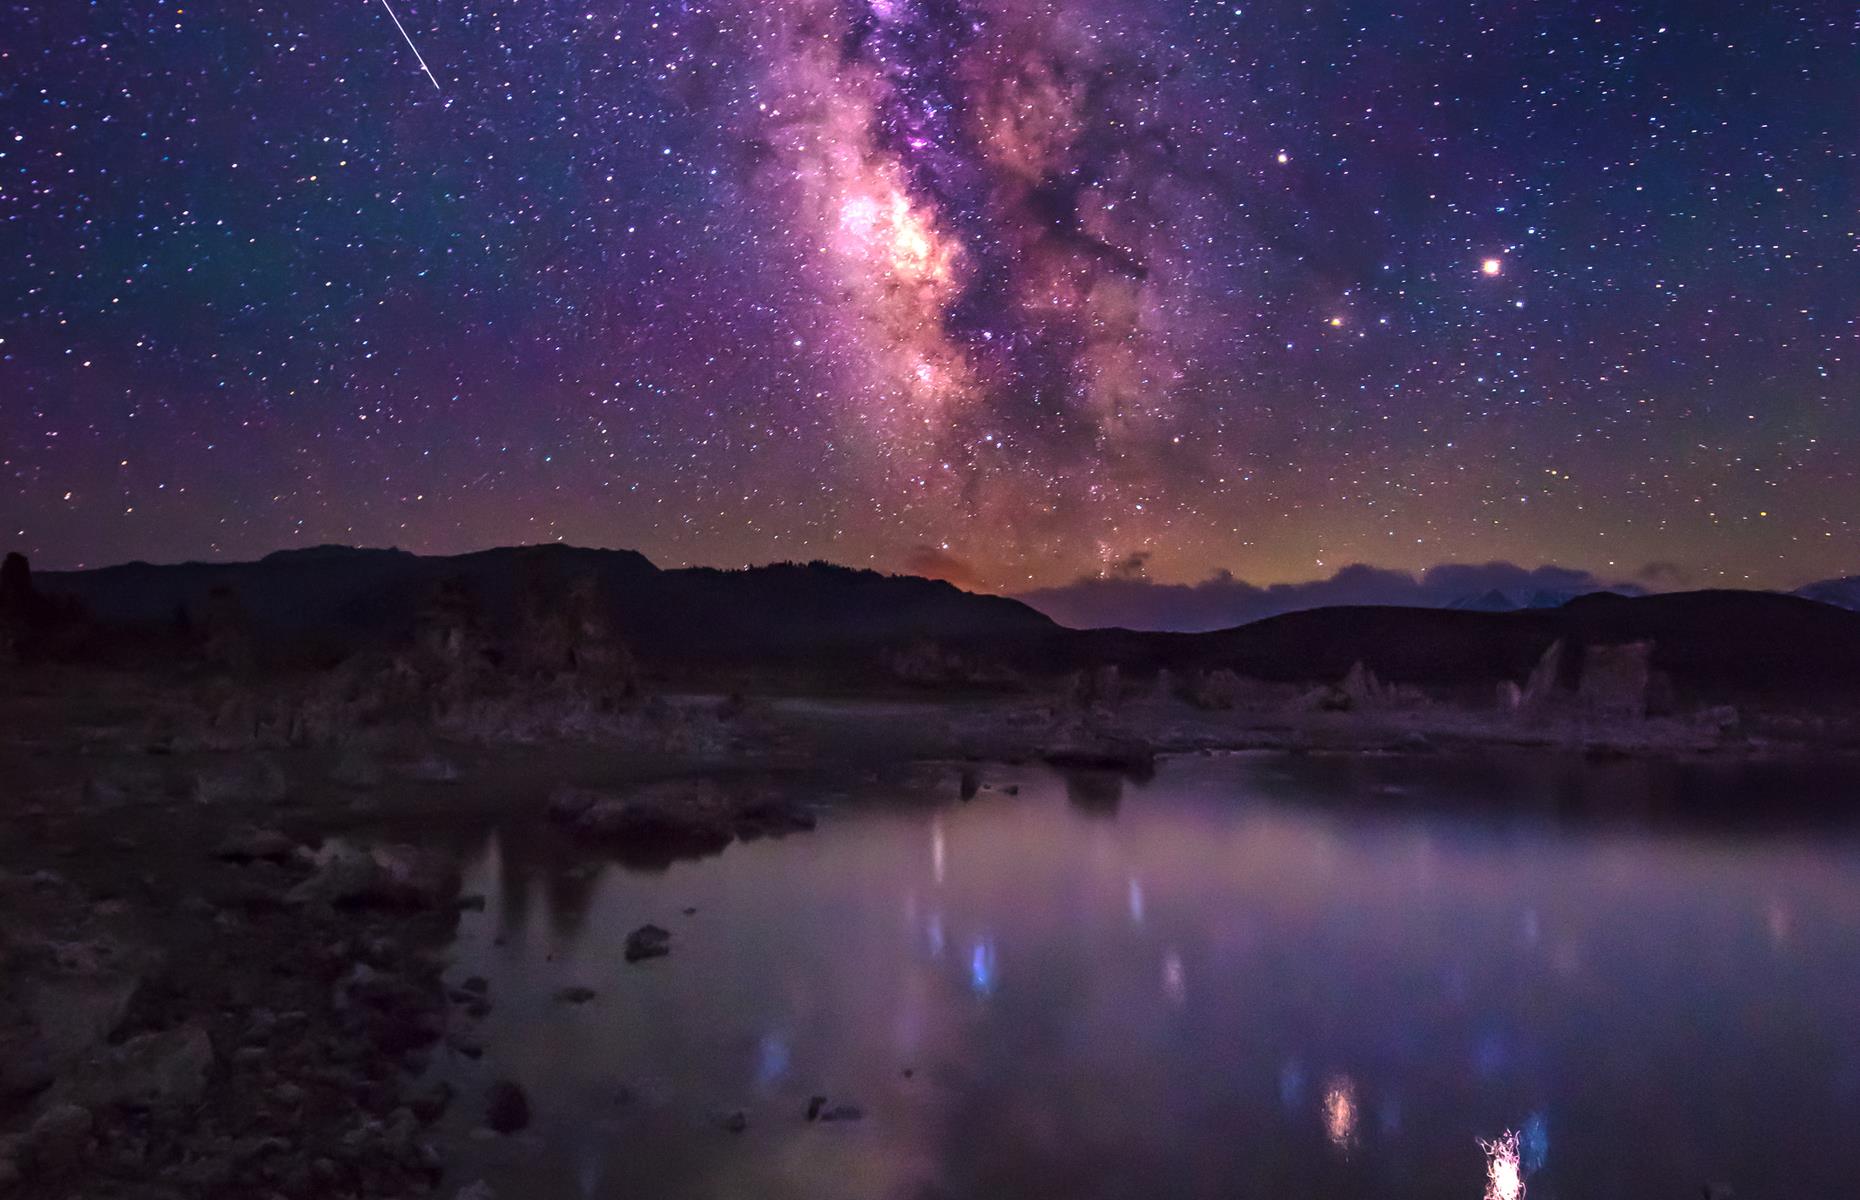 Imagine the clear night sky reflected in the waters of this age-old saline lake, covering 70 square miles (181sq km). Located at the edge of the Great Basin and the Sierra Nevada Mountains, this Californian beauty spot is known for its dark skies and jutting, calcified ‘tufa tower’ rocks, which together inspire an ever-deeper sense of natural wonder. The area is at least 760,000 years old – and who knows how far the sights above date back.